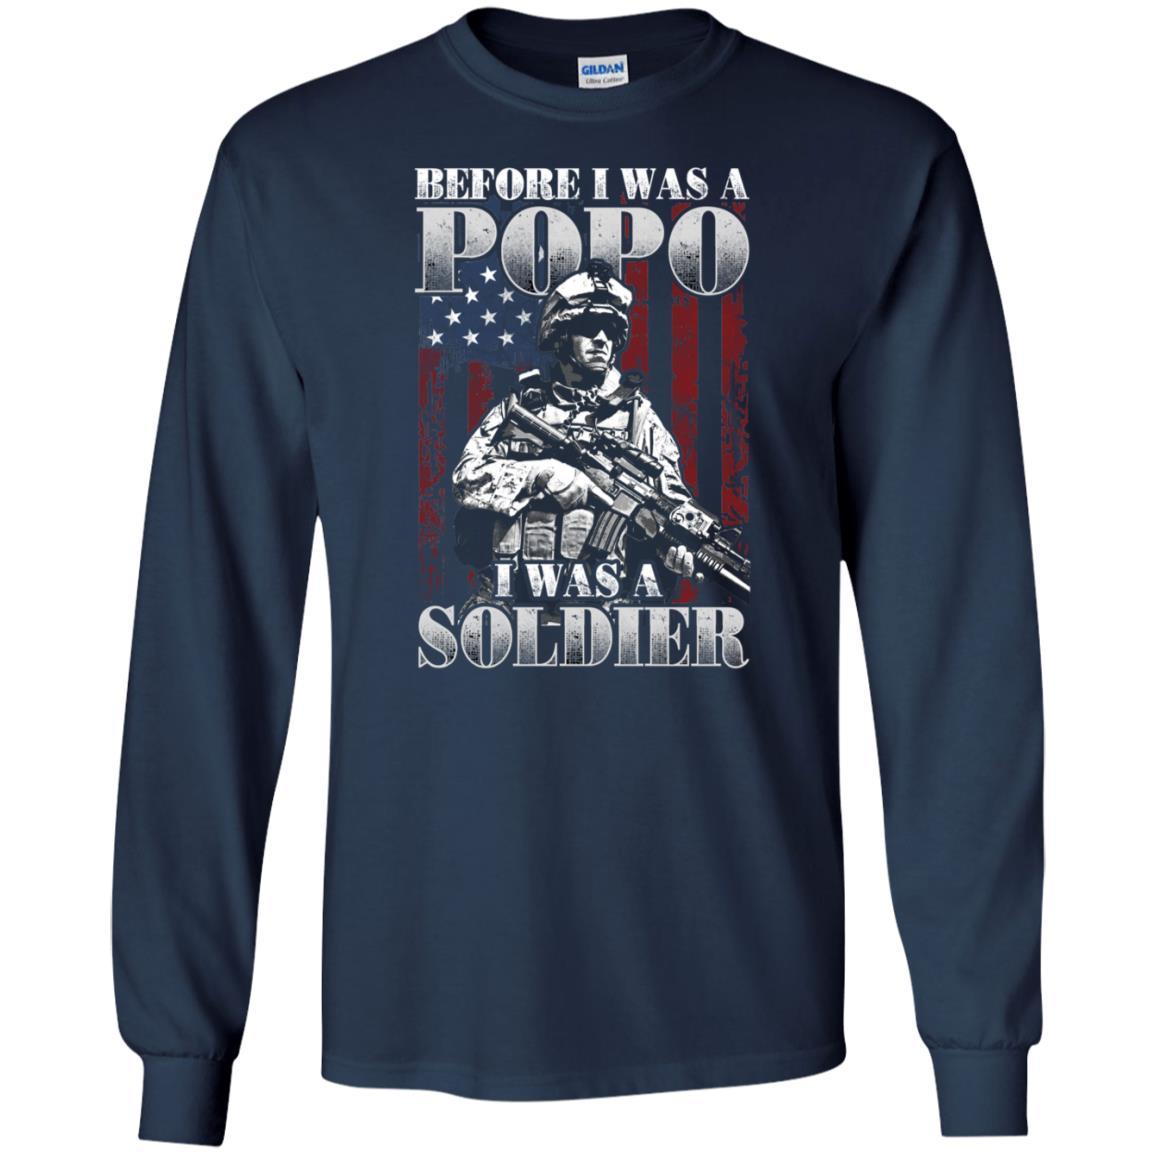 Military T-Shirt "BEFORE I WAS A POPO I WAS A SOLDIER On" Front-TShirt-General-Veterans Nation